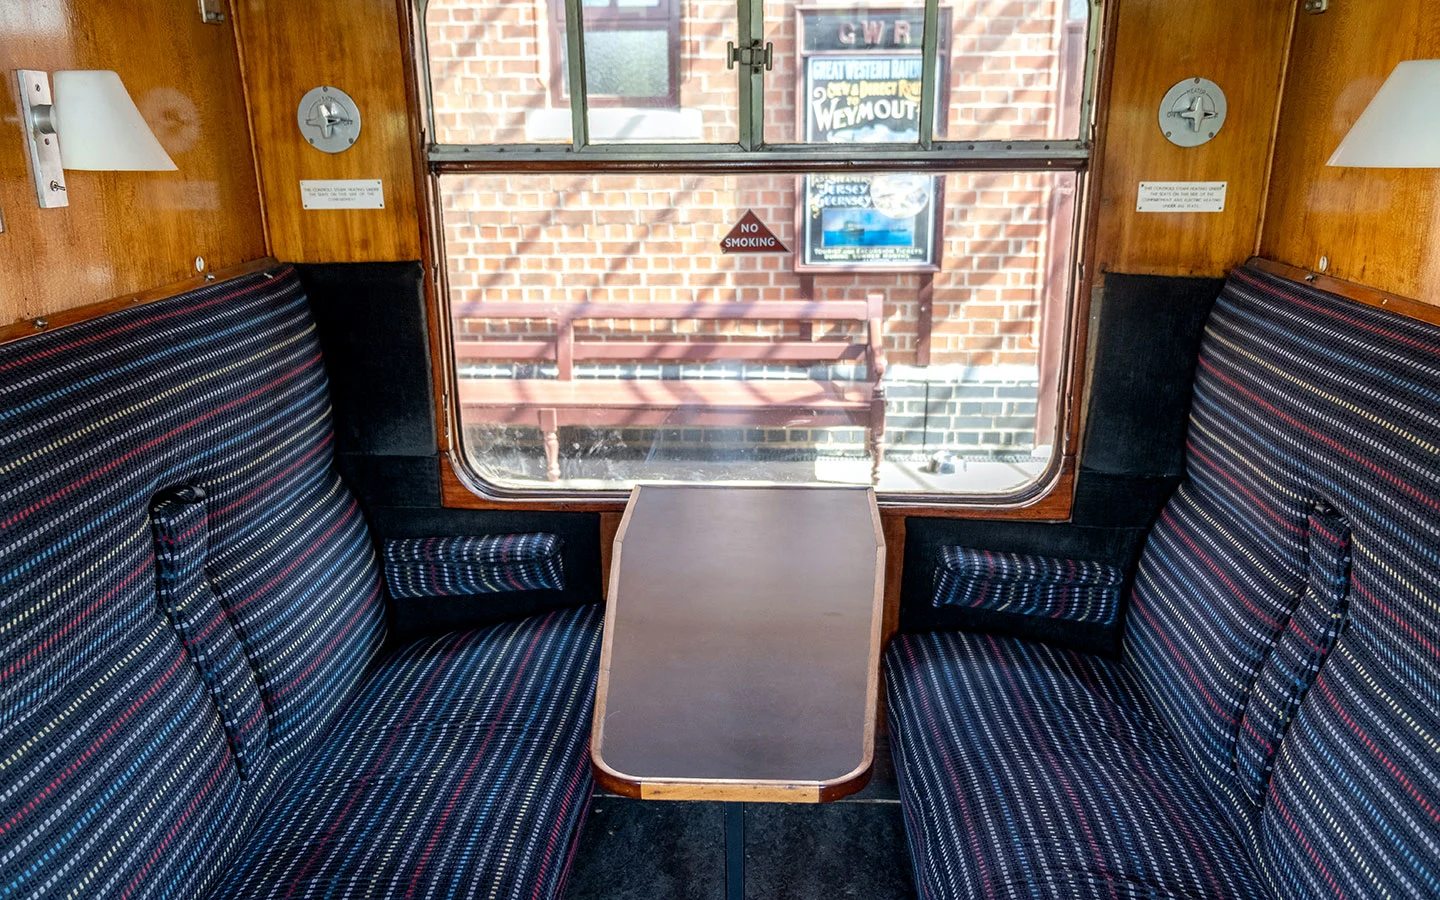 Seating in one of the compartments